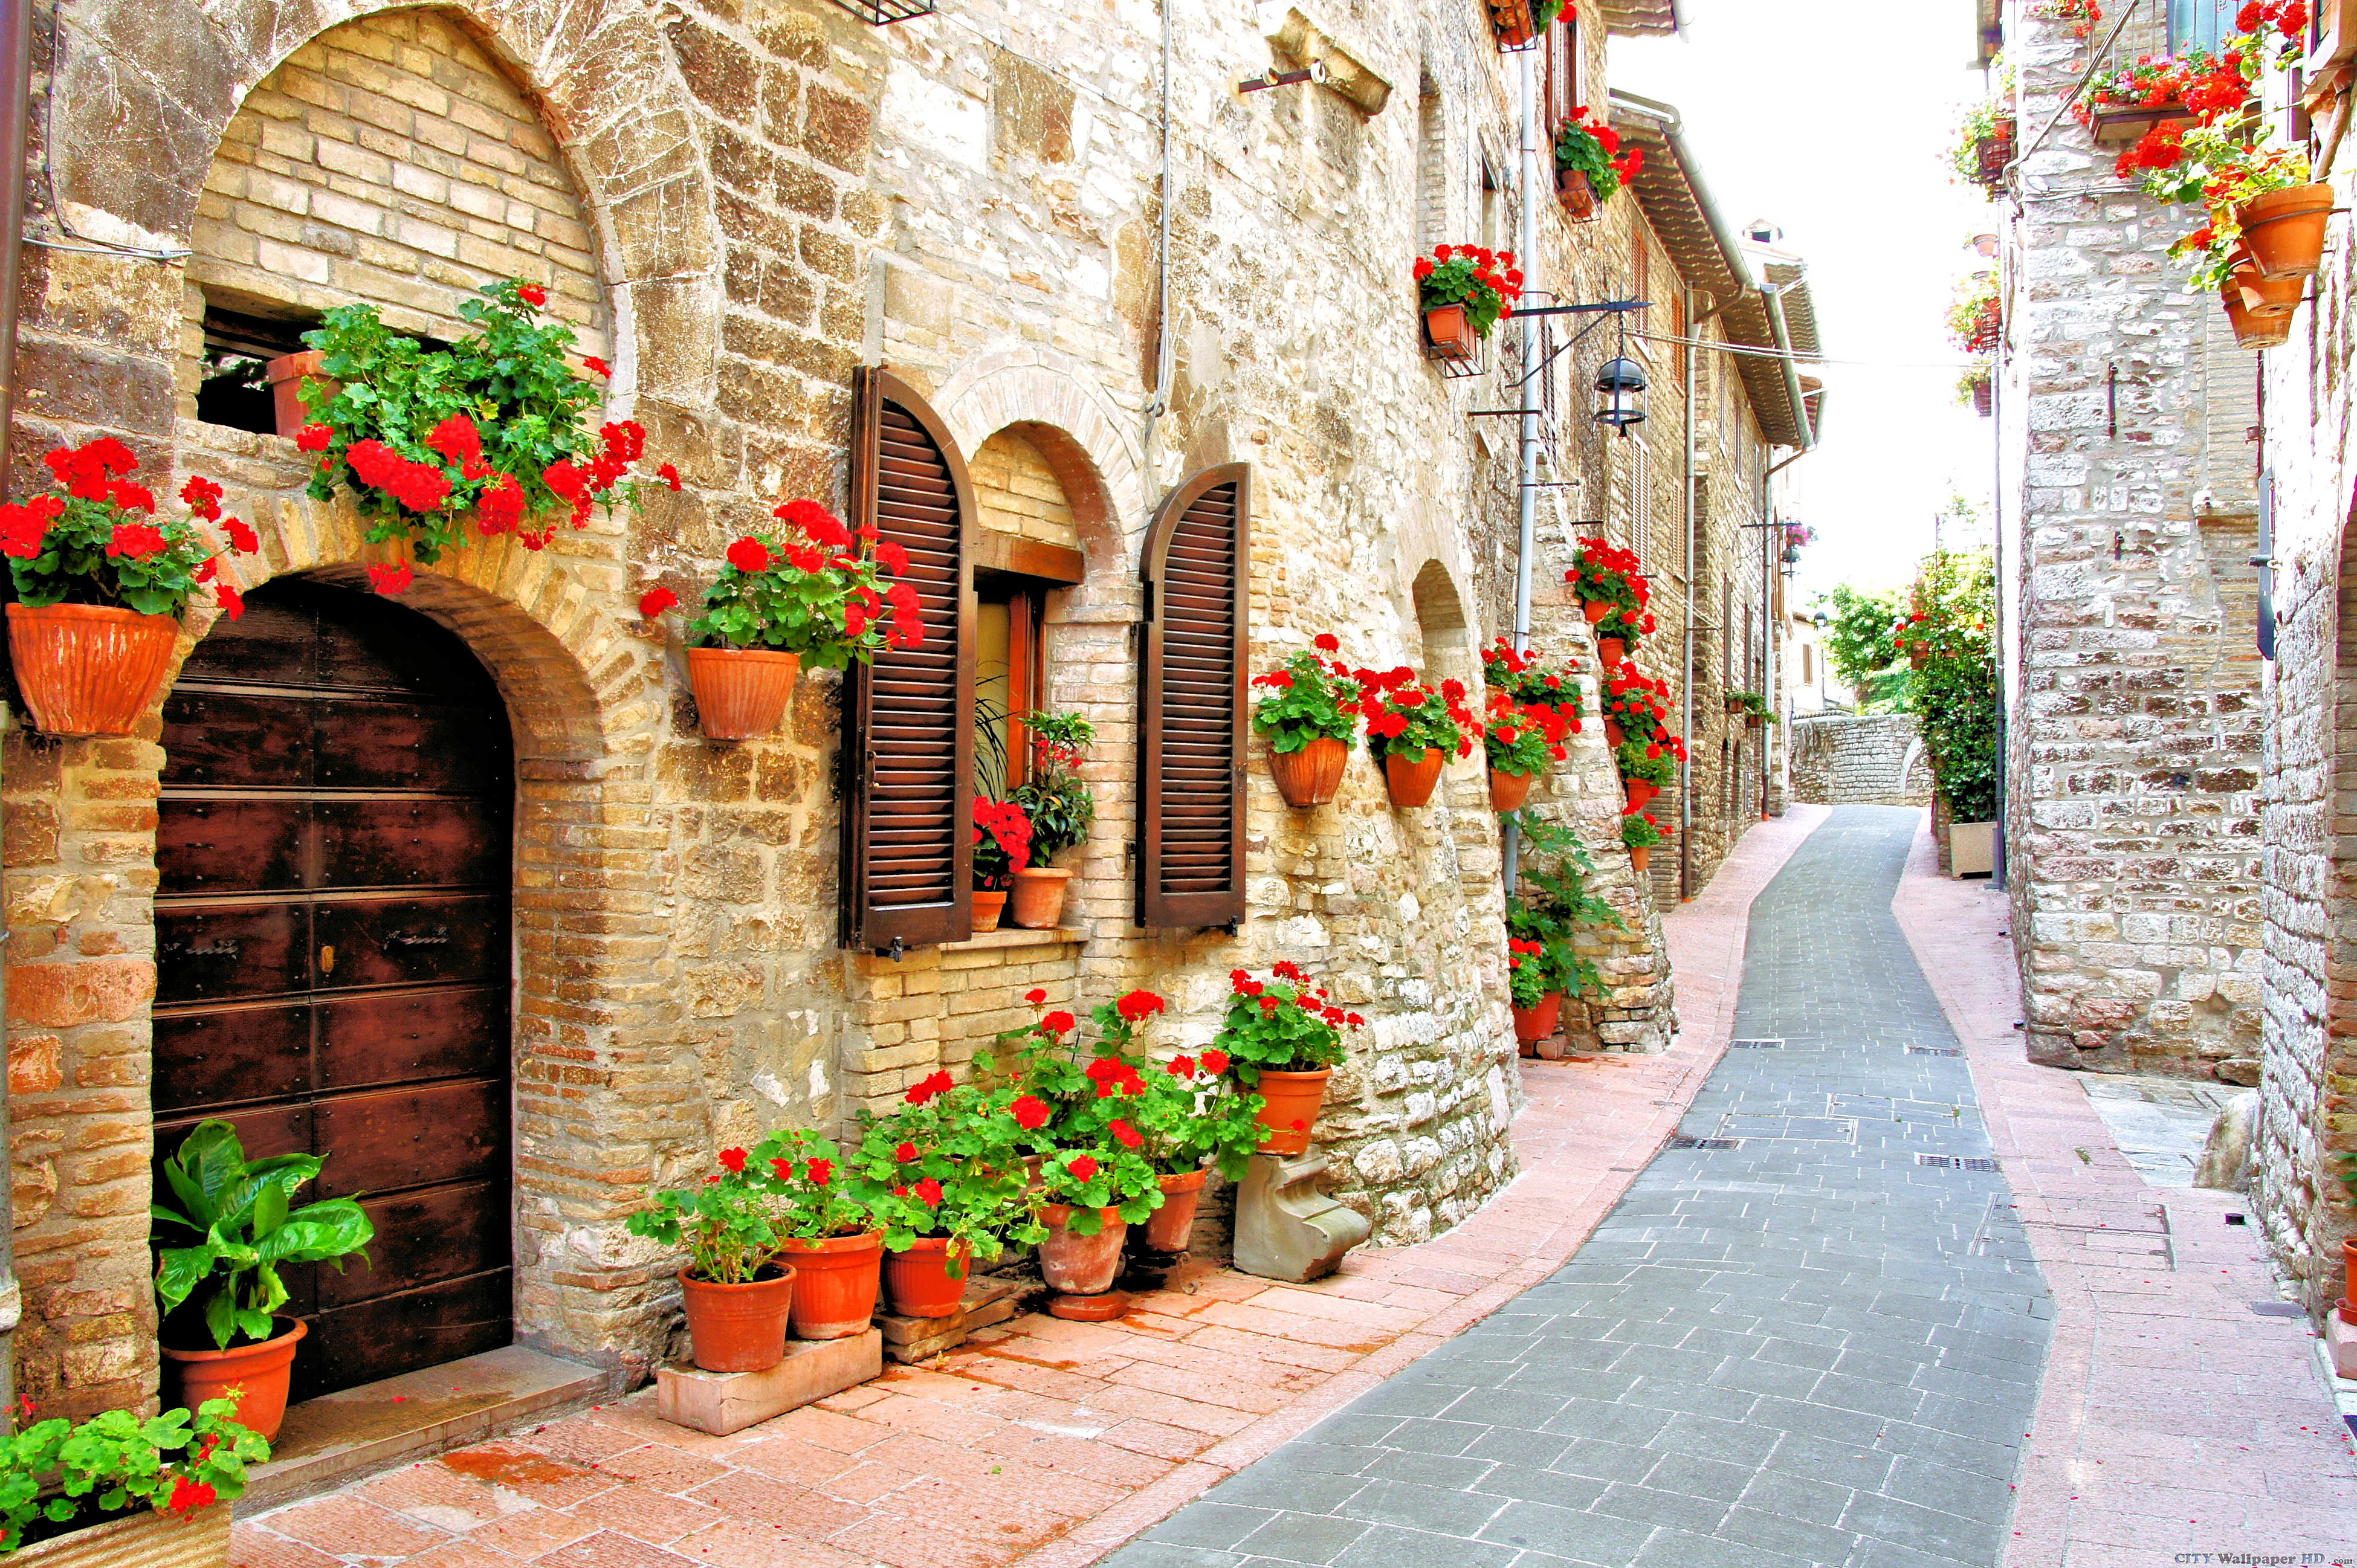 Beautiful Italy wallpaper. Cities around the world. Italy, buildings